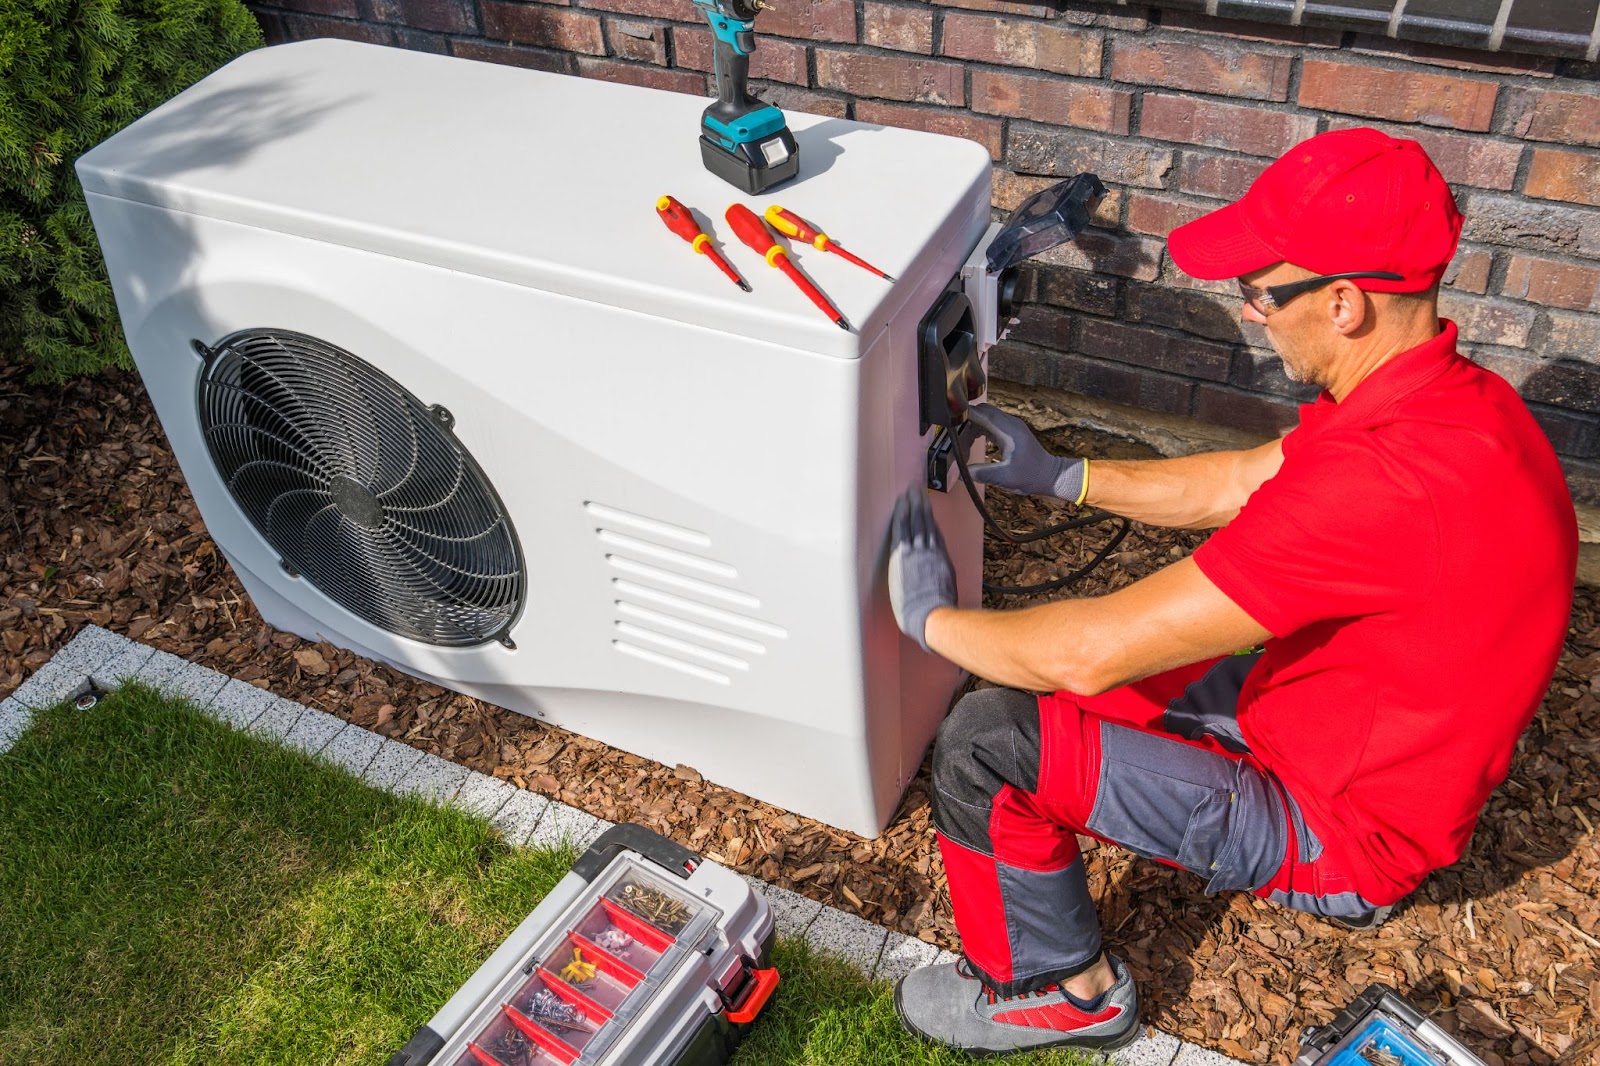 : A technician wearing a red shirt and baseball cap using tools to repair a heat pump outside of someone’s home. 